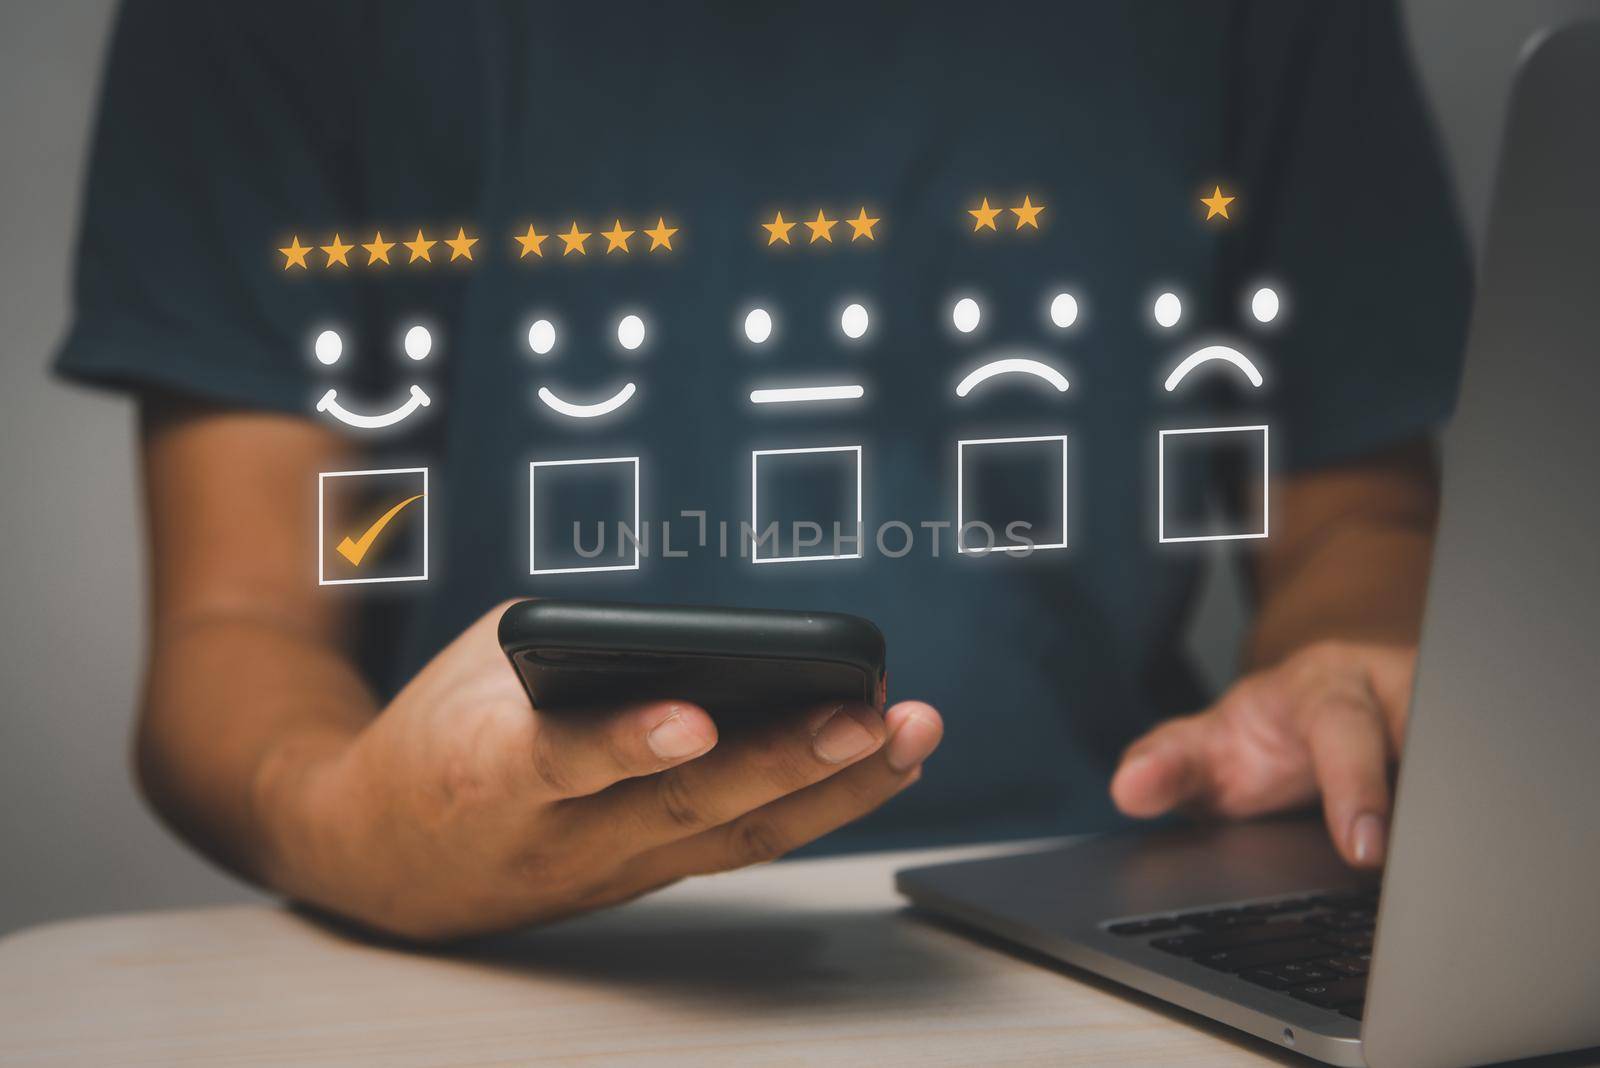 Customer review satisfaction feedback survey.Give very satisfied rating with smiley face icon service experience on online application concept.